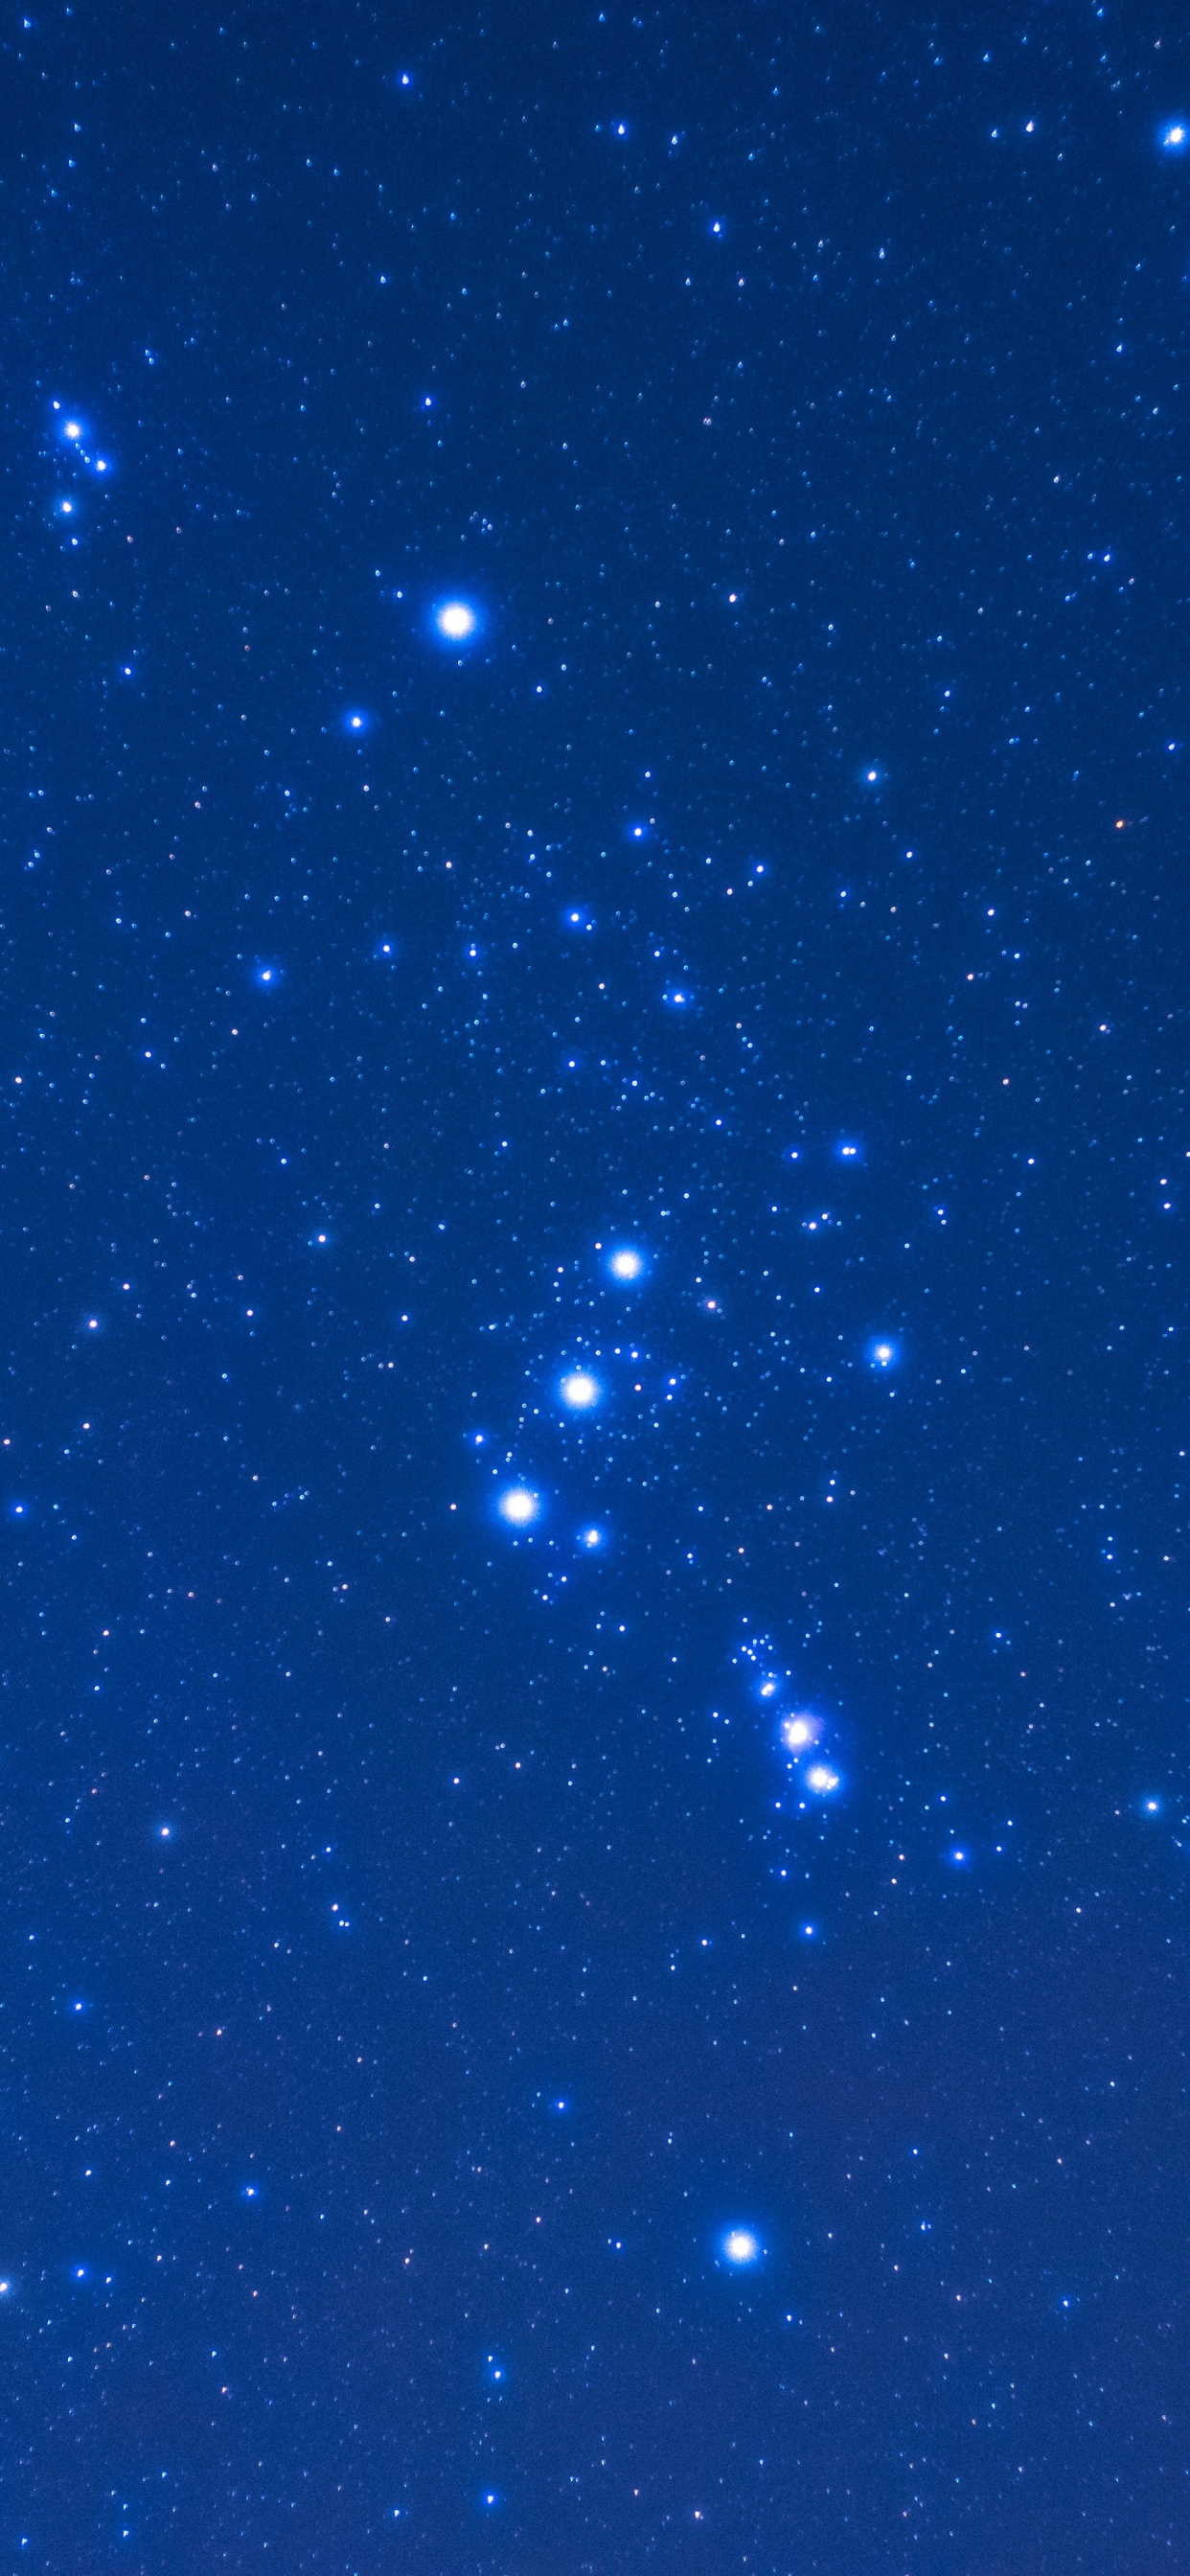 Blue and White Stars in Blue Sky. Wallpaper in 1242x2688 Resolution